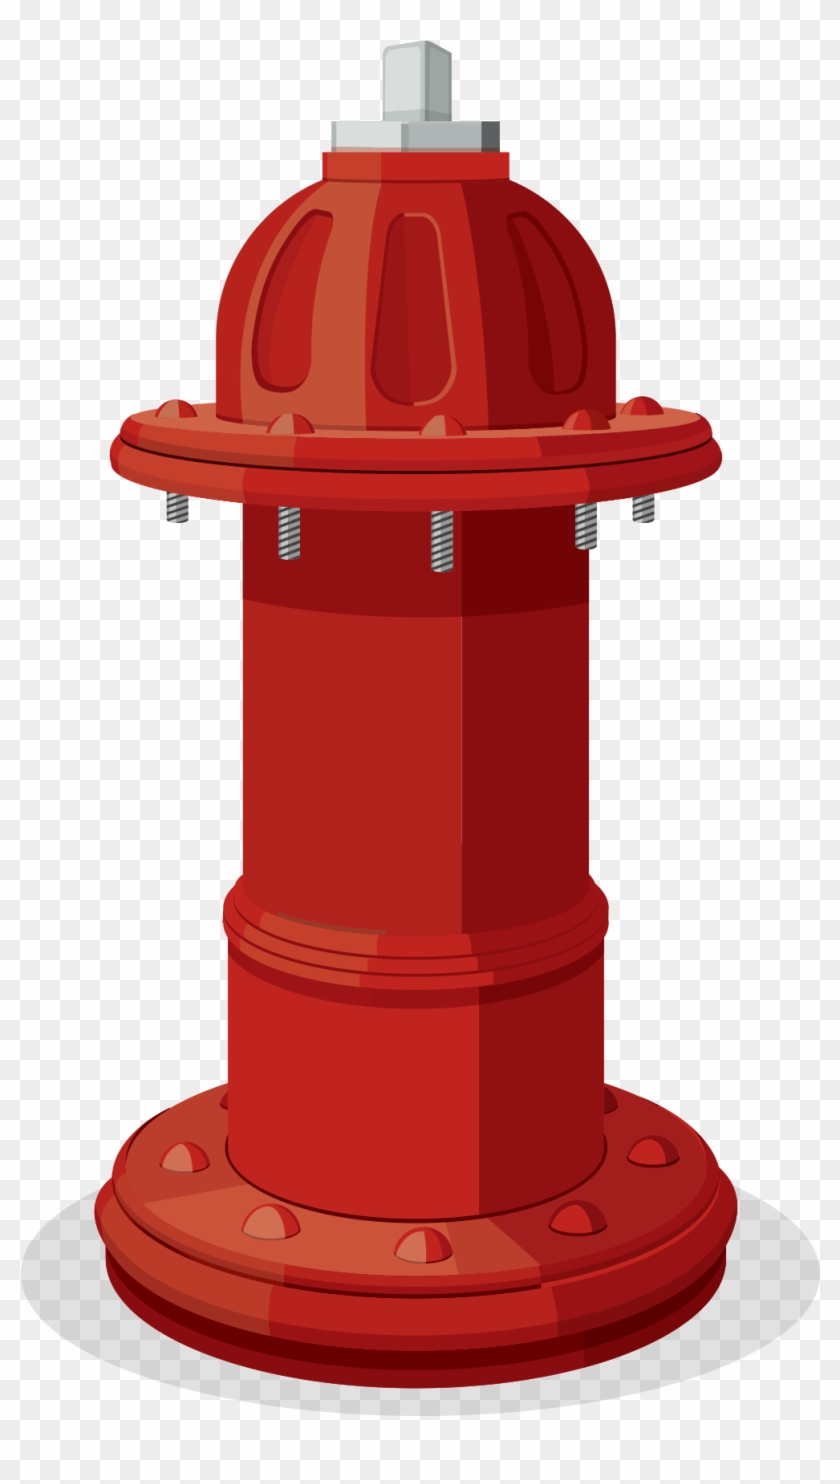 Download - Fire Hydrant Clipart